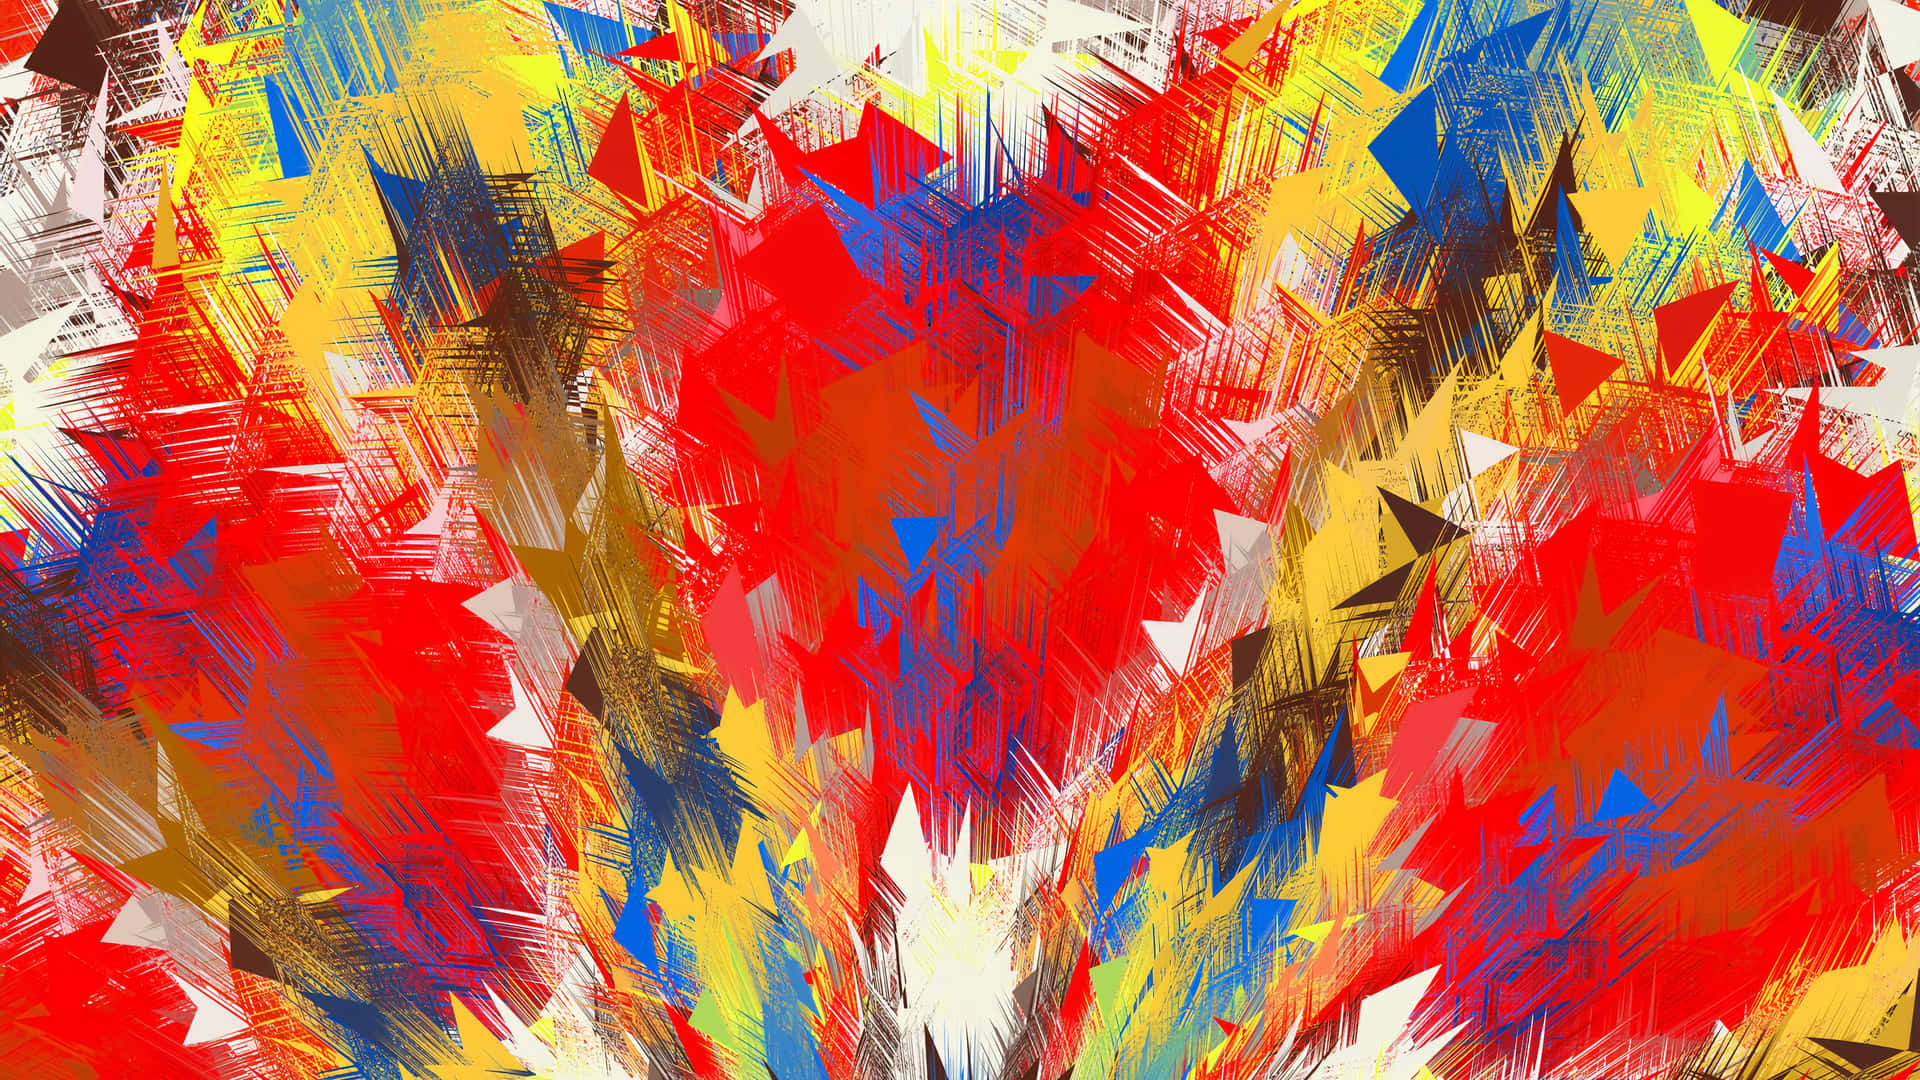 Brighten Up Your Space With Colorful Abstract Art